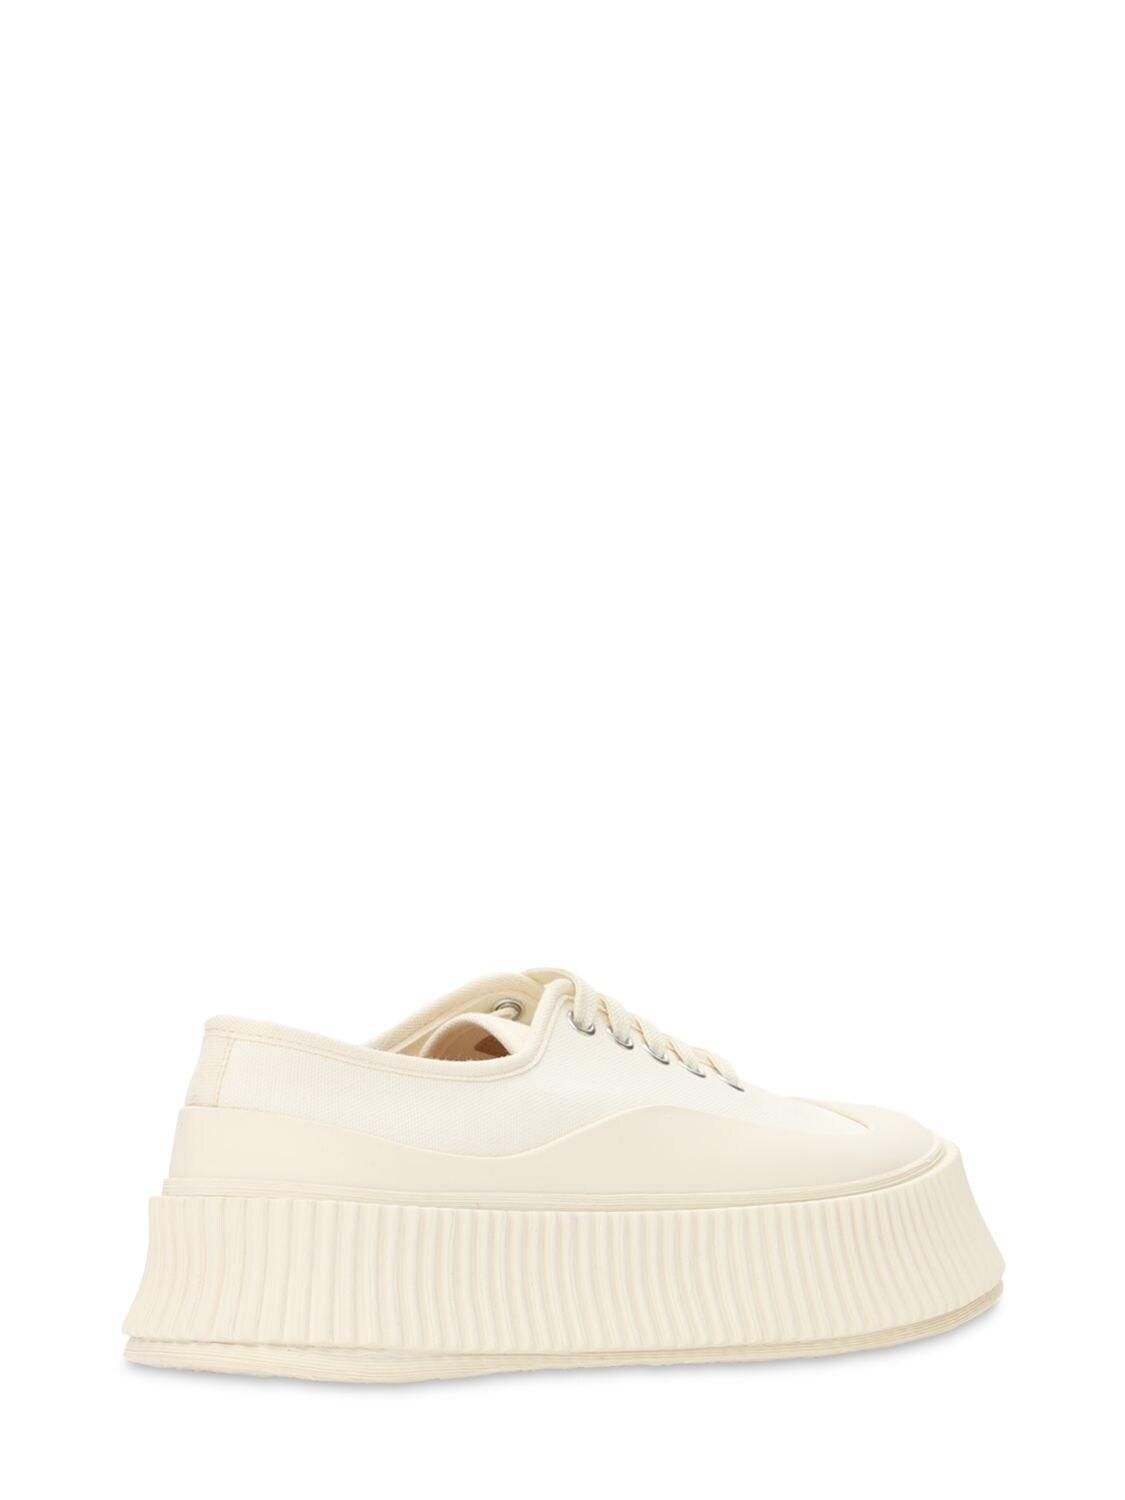 Jil Sander 40mm Vulcanized Cotton Canvas Sneakers in Cream (Natural) | Lyst